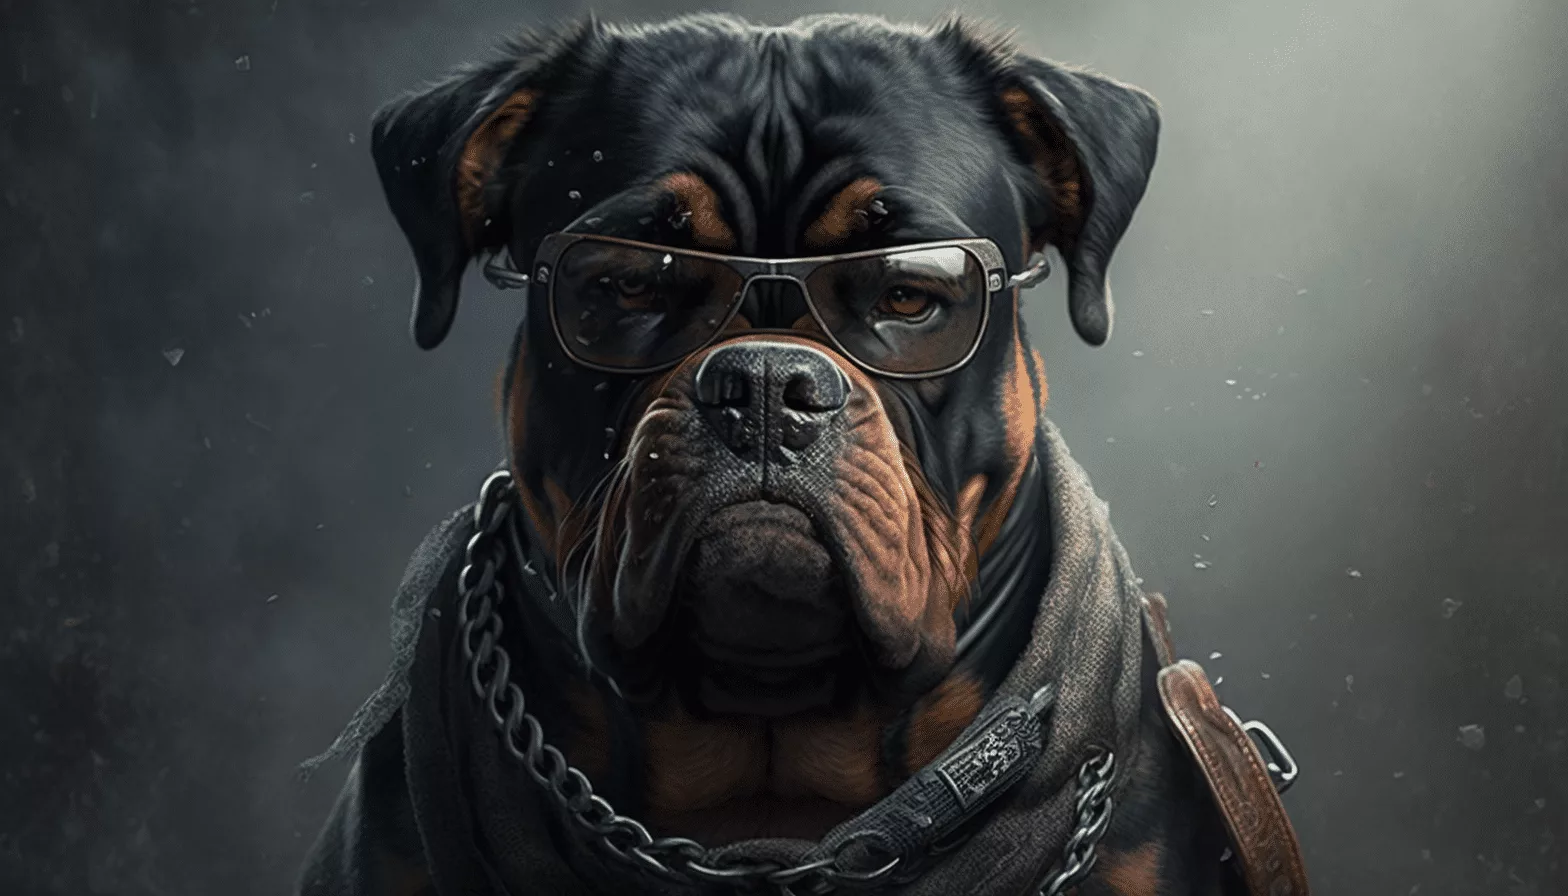 A rottweiler dog wearing glasses and a chain.